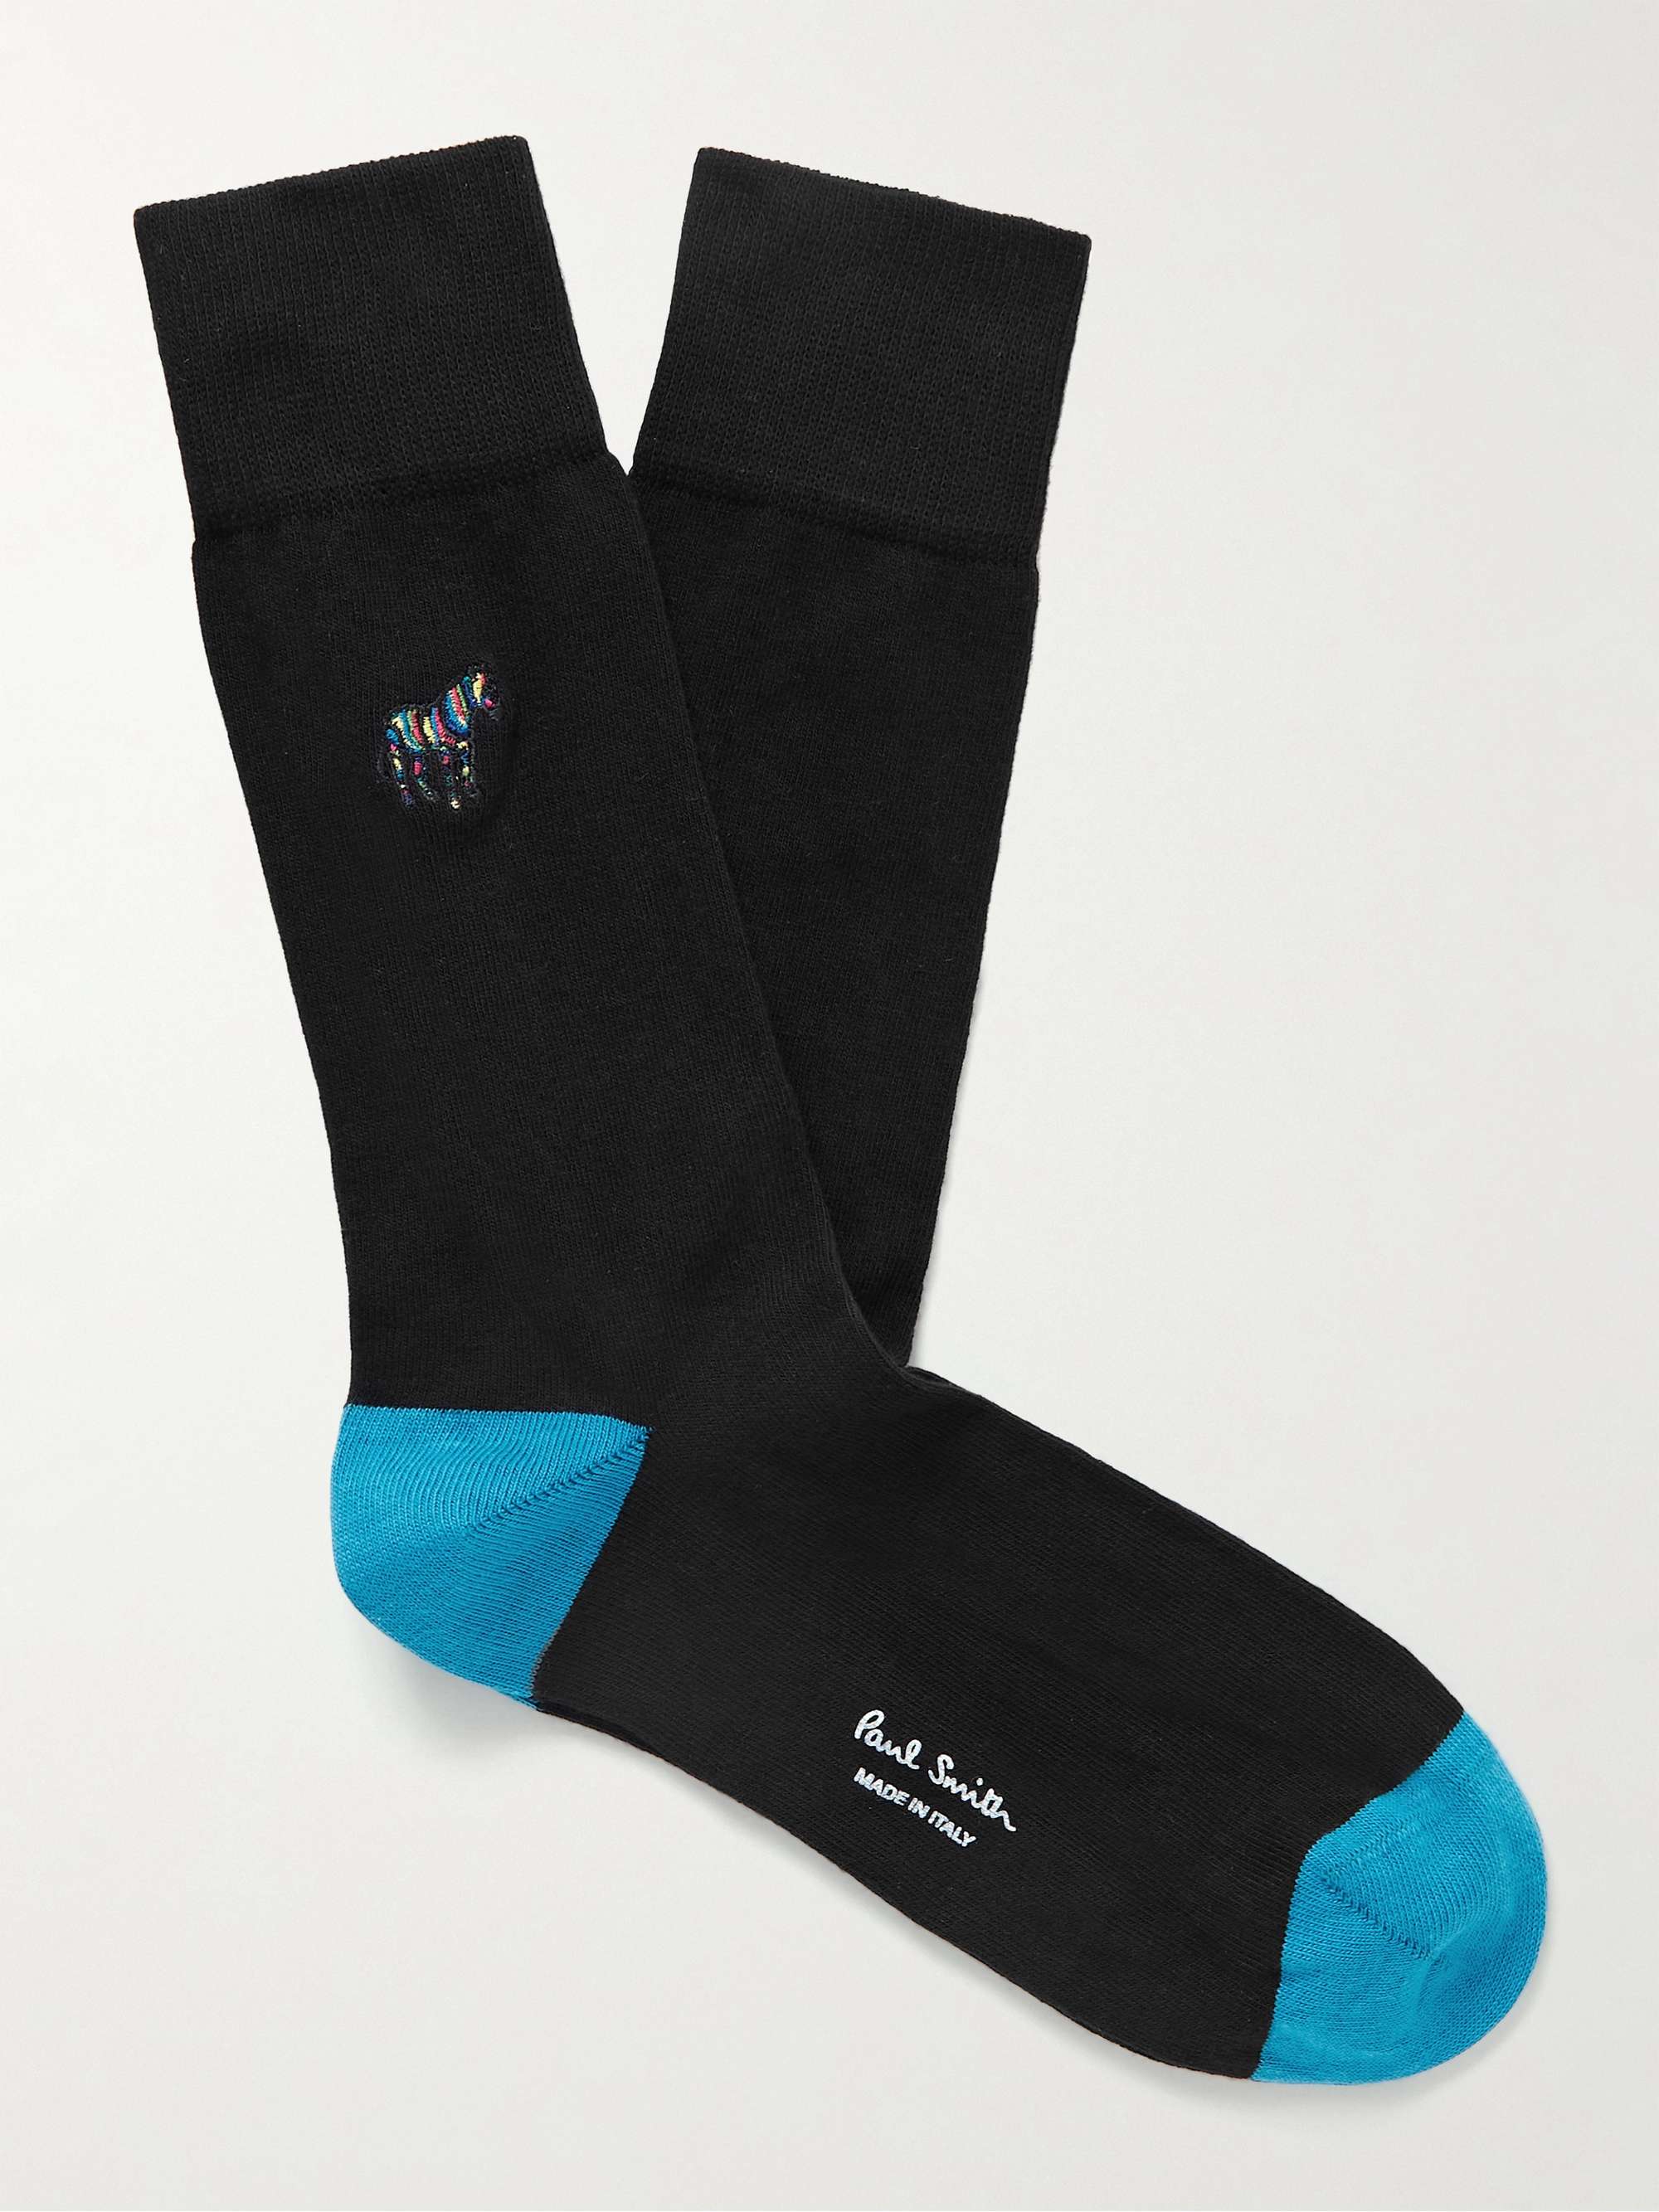 PAUL SMITH Embroidered Cotton-Blend Socks